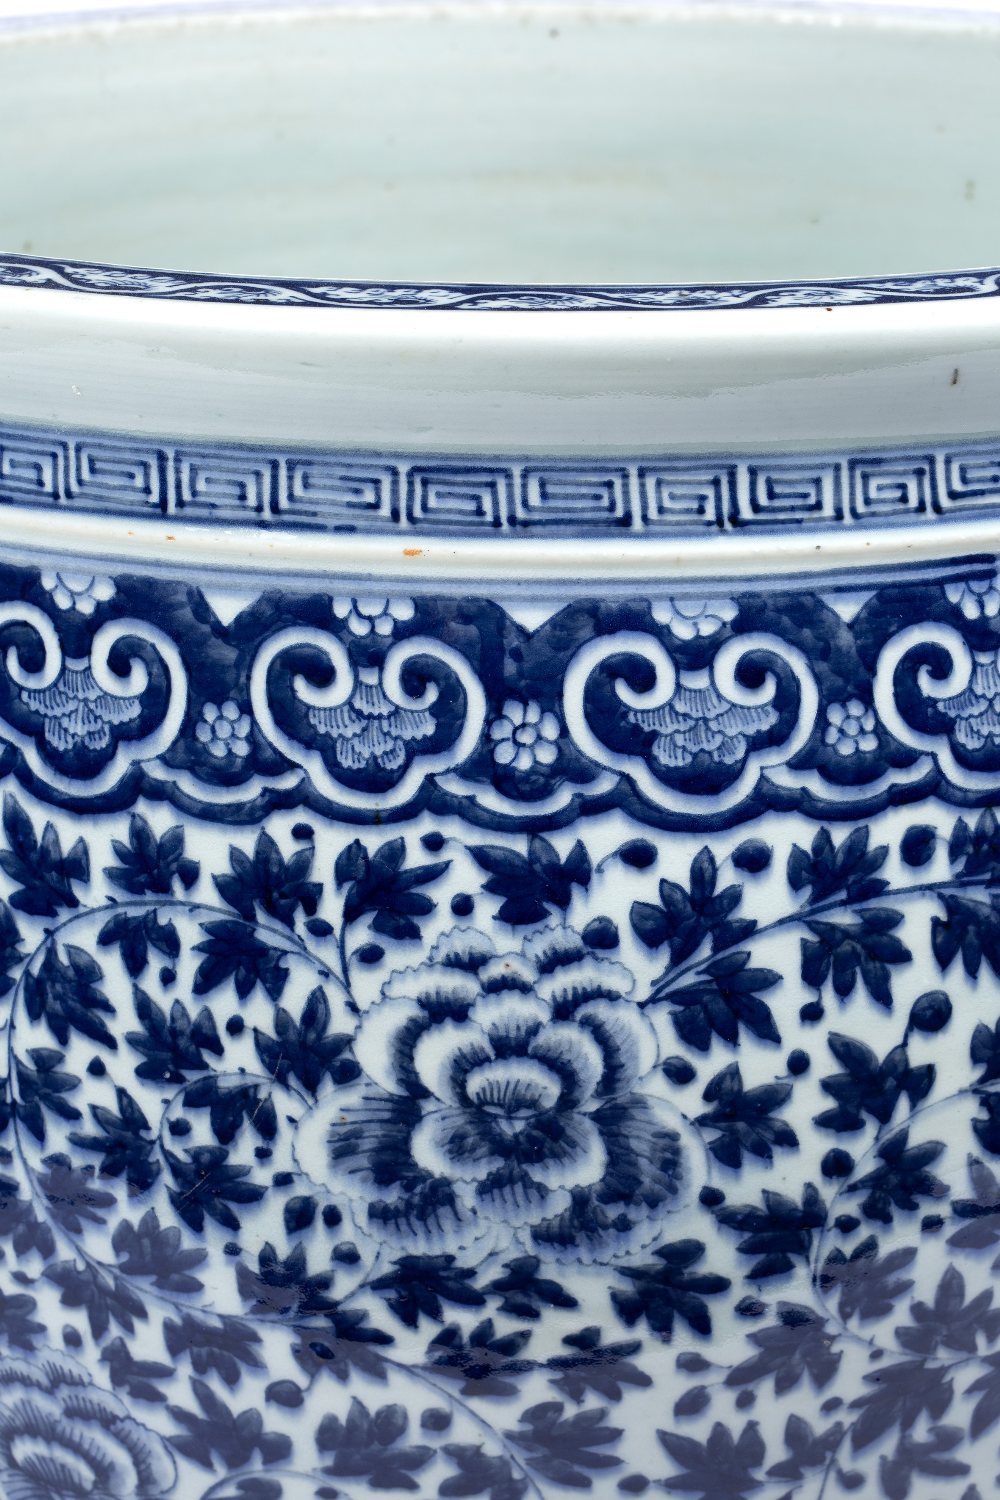 Blue and white goldfish jardiniere Chinese, 19th Century decorated with a Ming style lotus and - Image 2 of 4